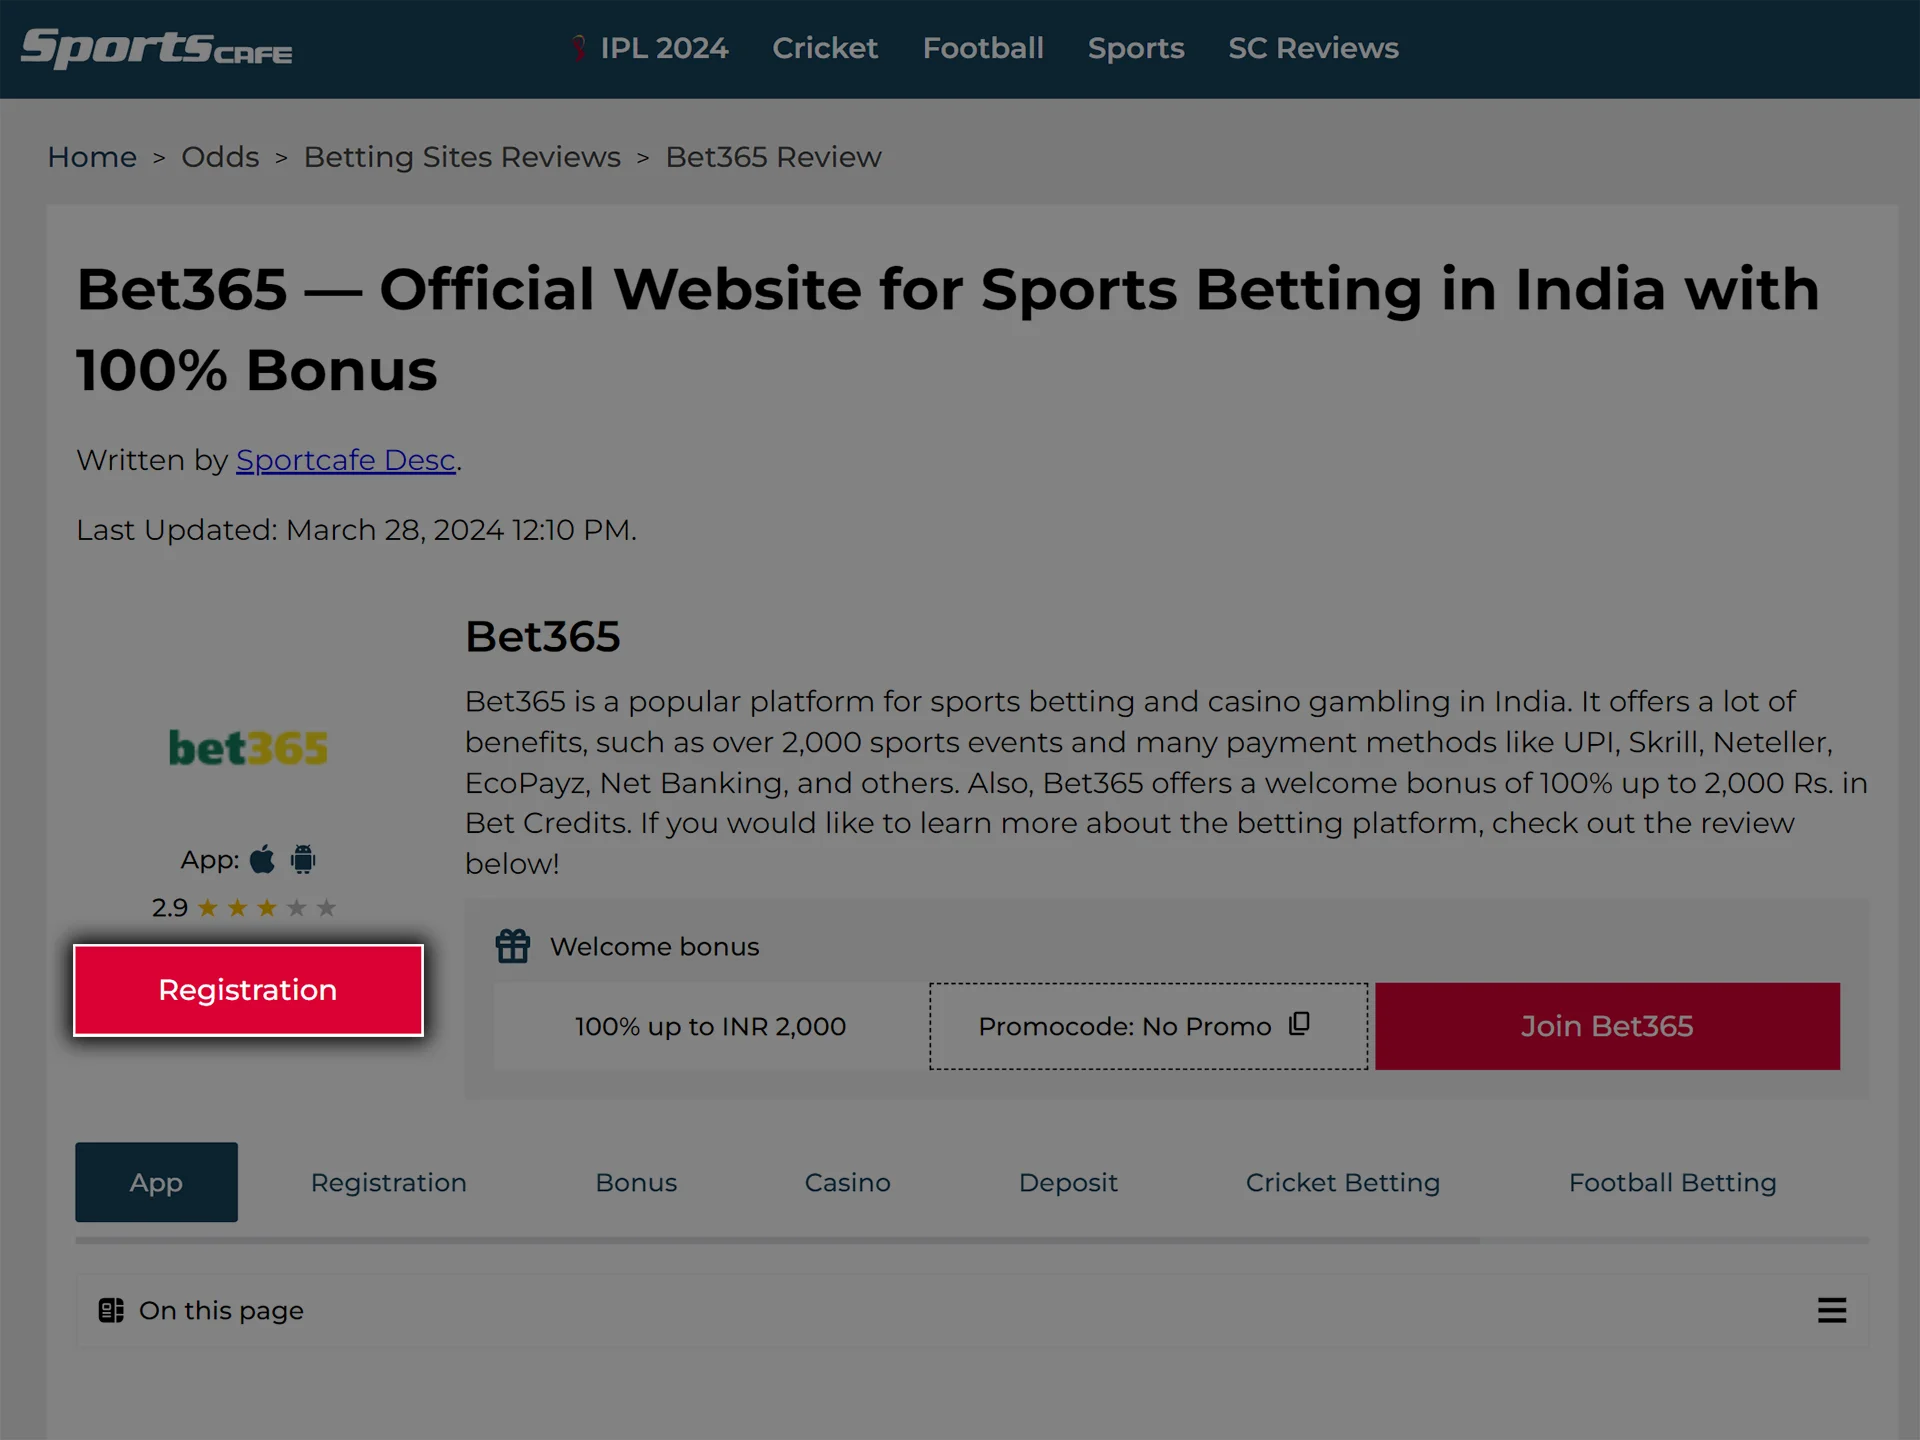 Click on the button in the header of the review to go to the Bet365 website.